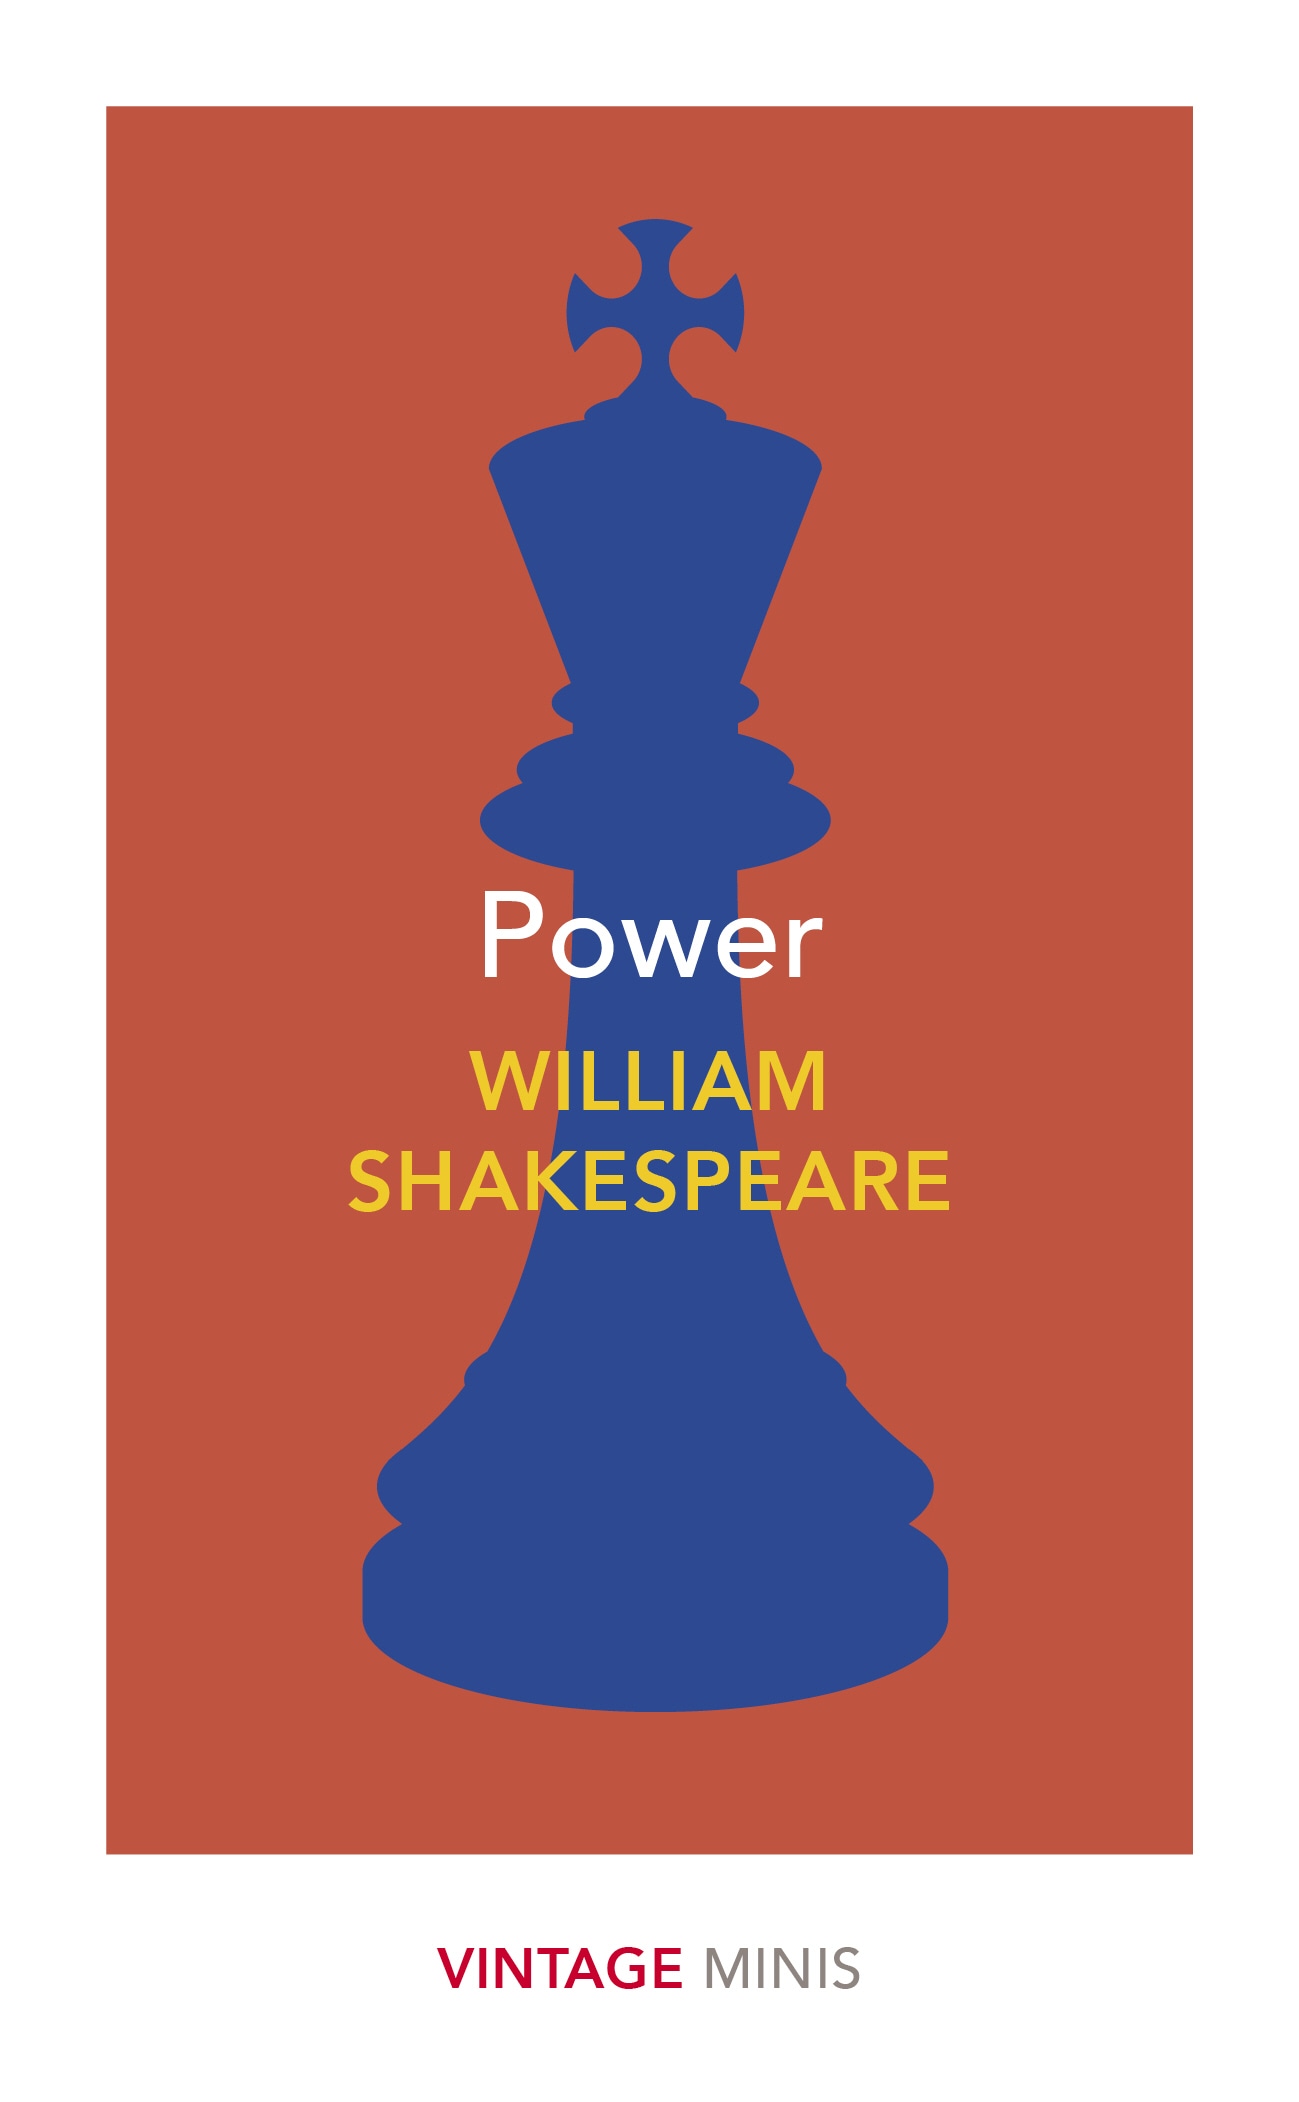 Book “Power” by William Shakespeare — March 5, 2020